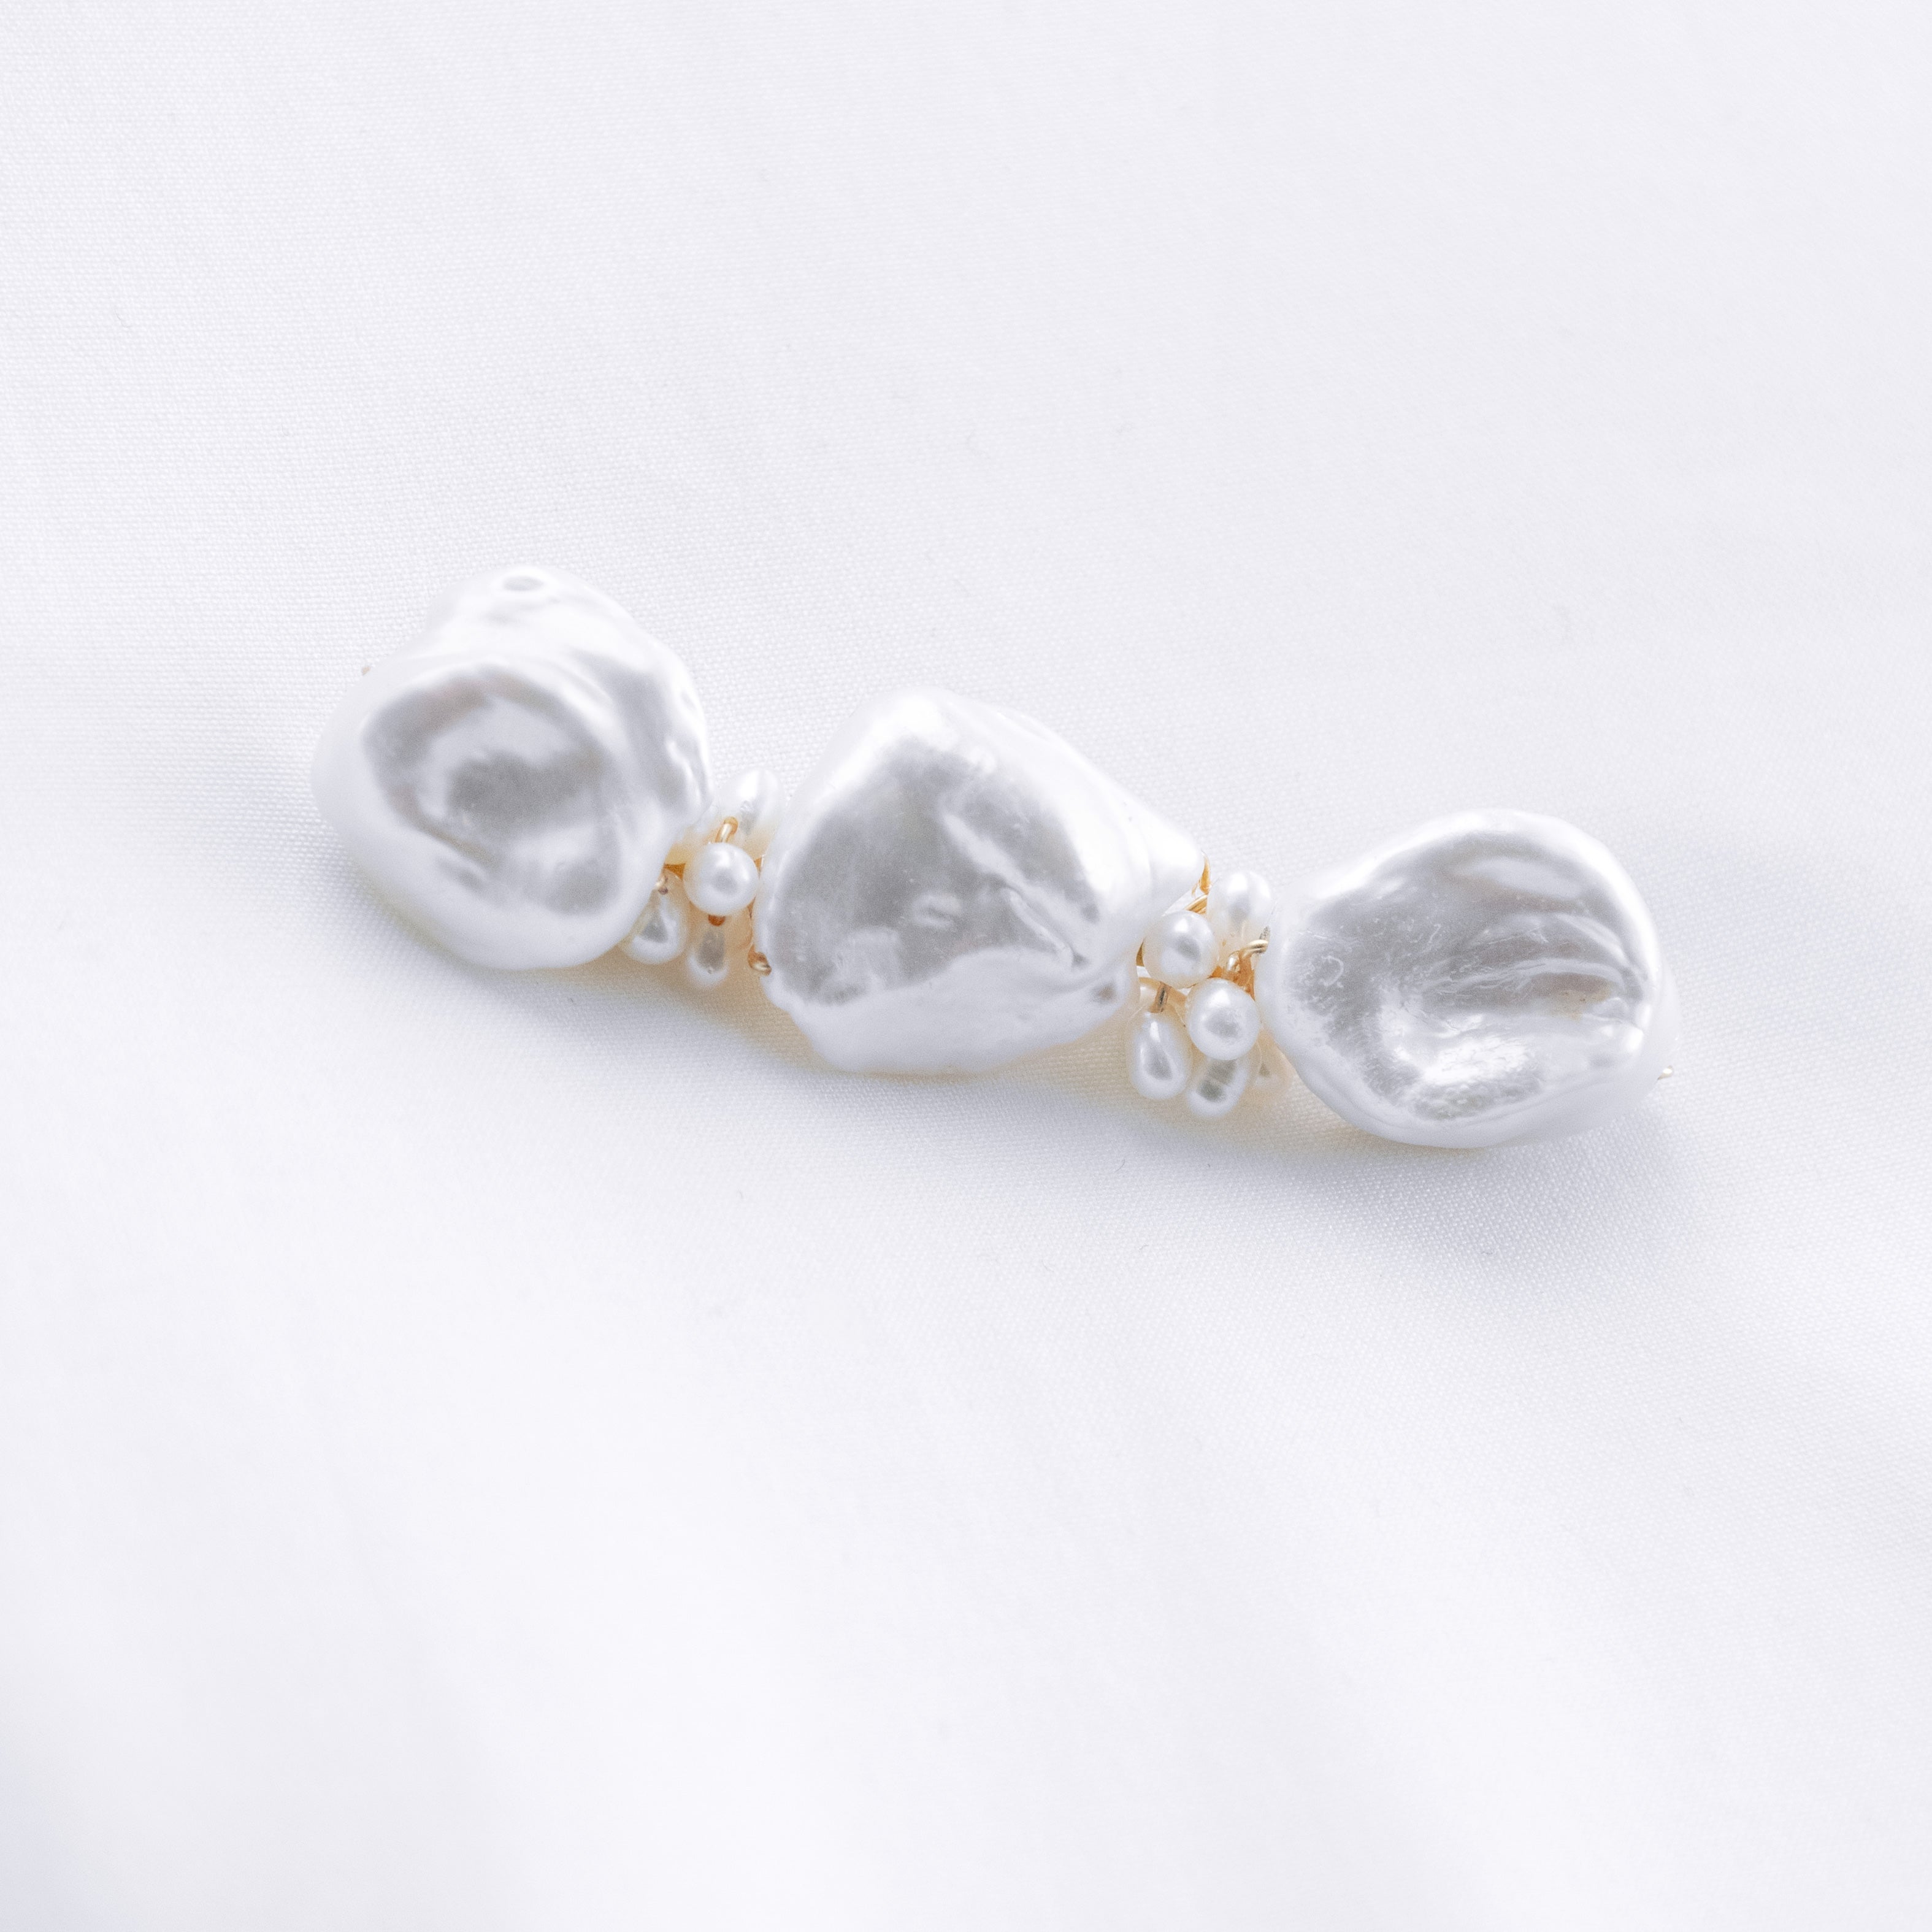 Baroque Pearl Mix Bridal Hair Accessories from One Dame Lane